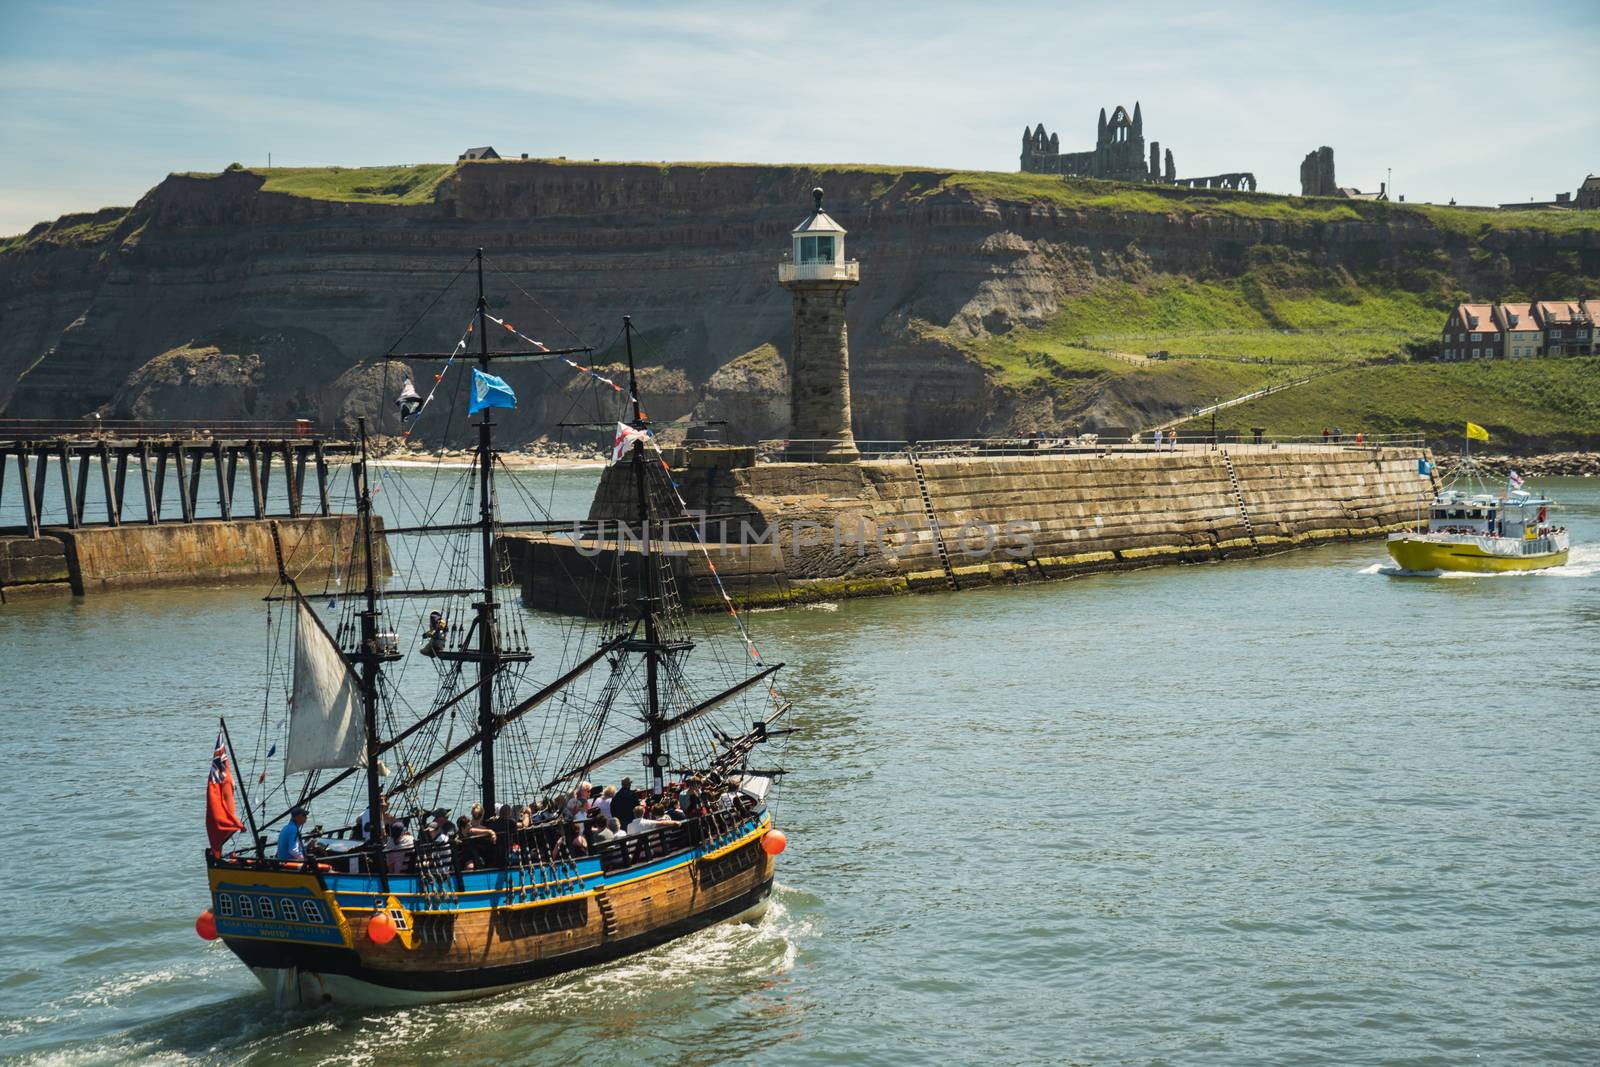 Captain James Cook in Whitby by samULvisuals